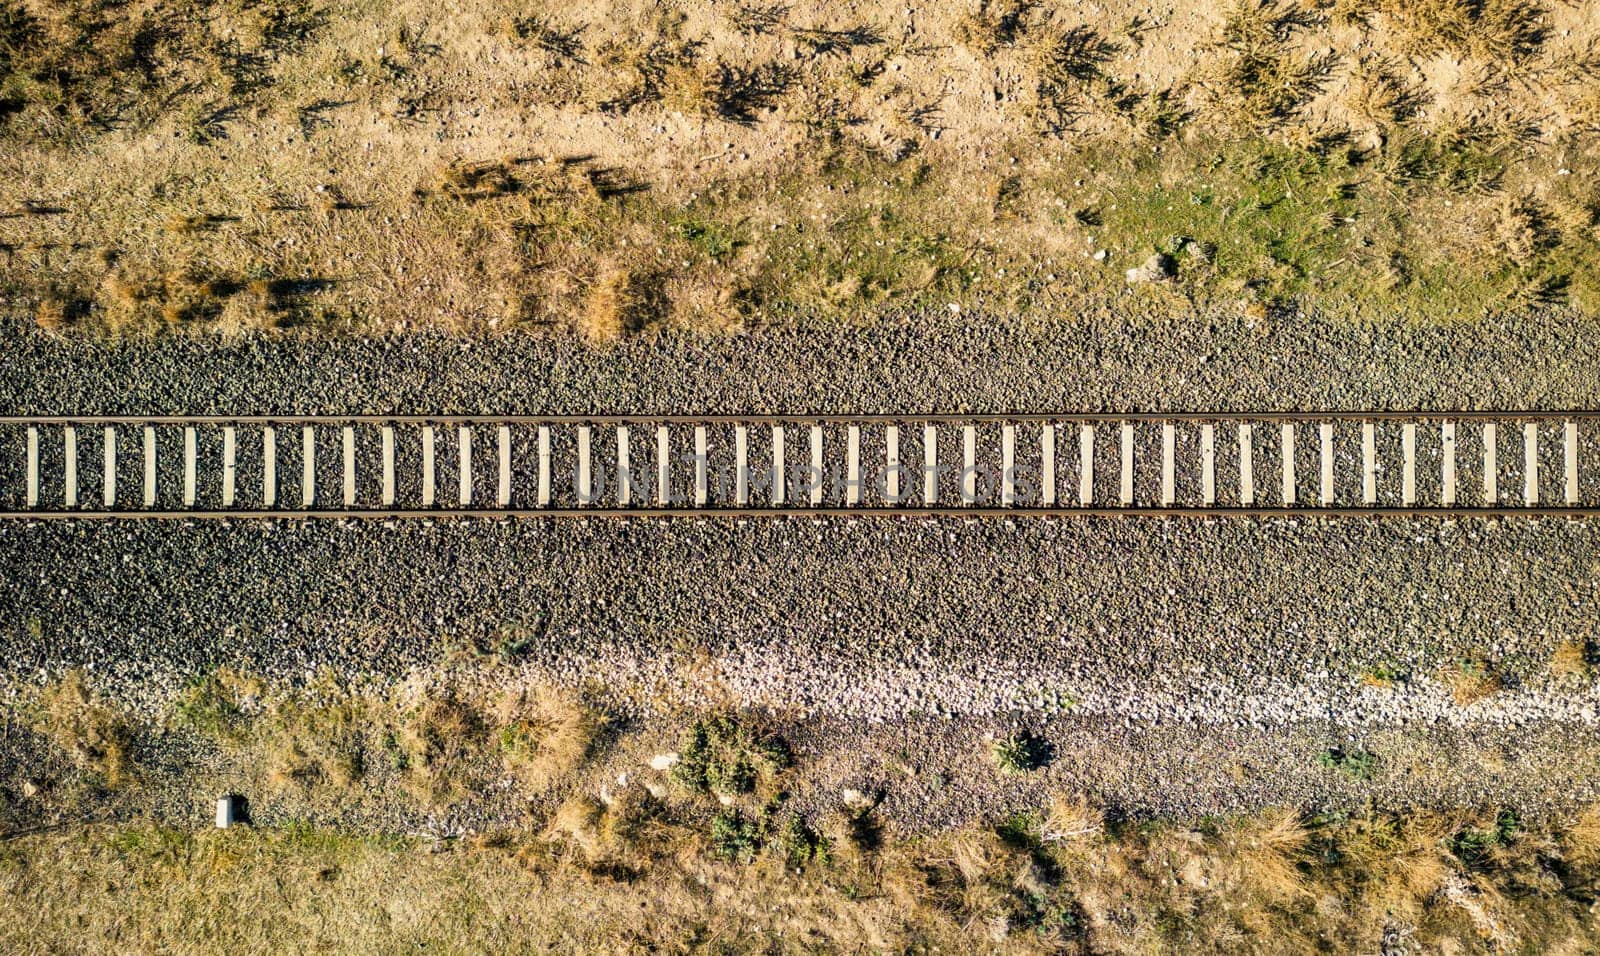 Top view of the train track passing through the arid land, taken with a drone by Sonat